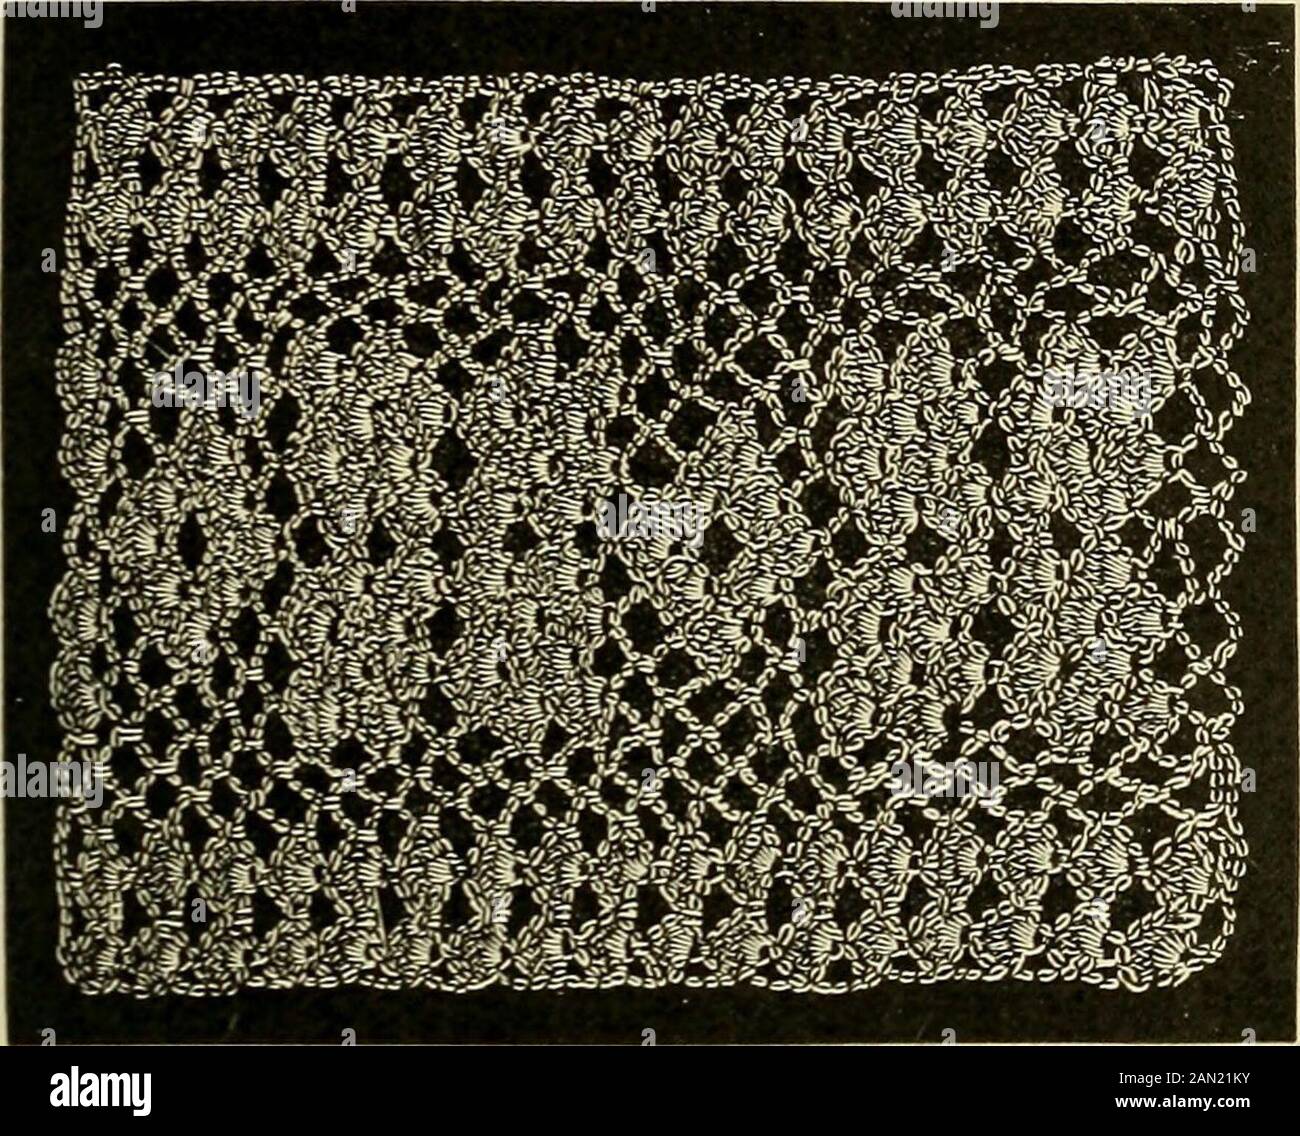 A treatise on lace-making, embroidery, and needle-work with Irish flax threads . of next sh, *ch 5, fasten in centre of 5 ch, repeat from * once, * shell in nex i oexl dc, i tsten in centre of next sh, repeat once from *, * ch NORWEGIAN INSERTION. 33 5, fasten in 5 ch, repeat once, sh in next dc, fasten in 5 ch, sh innext dc, fasten in loop at the end, ch 5, turn. 5. Like 3d row. 6. Like 4th row. 7. Fasten in centre of sh, ch 5, fasten in next sh, * ch 5, fasten incentre of next 5 ch, repeat 10 times, putting the fastening dc incentre of 5 ch or of sh, as the case may be, the last in loop at e Stock Photo